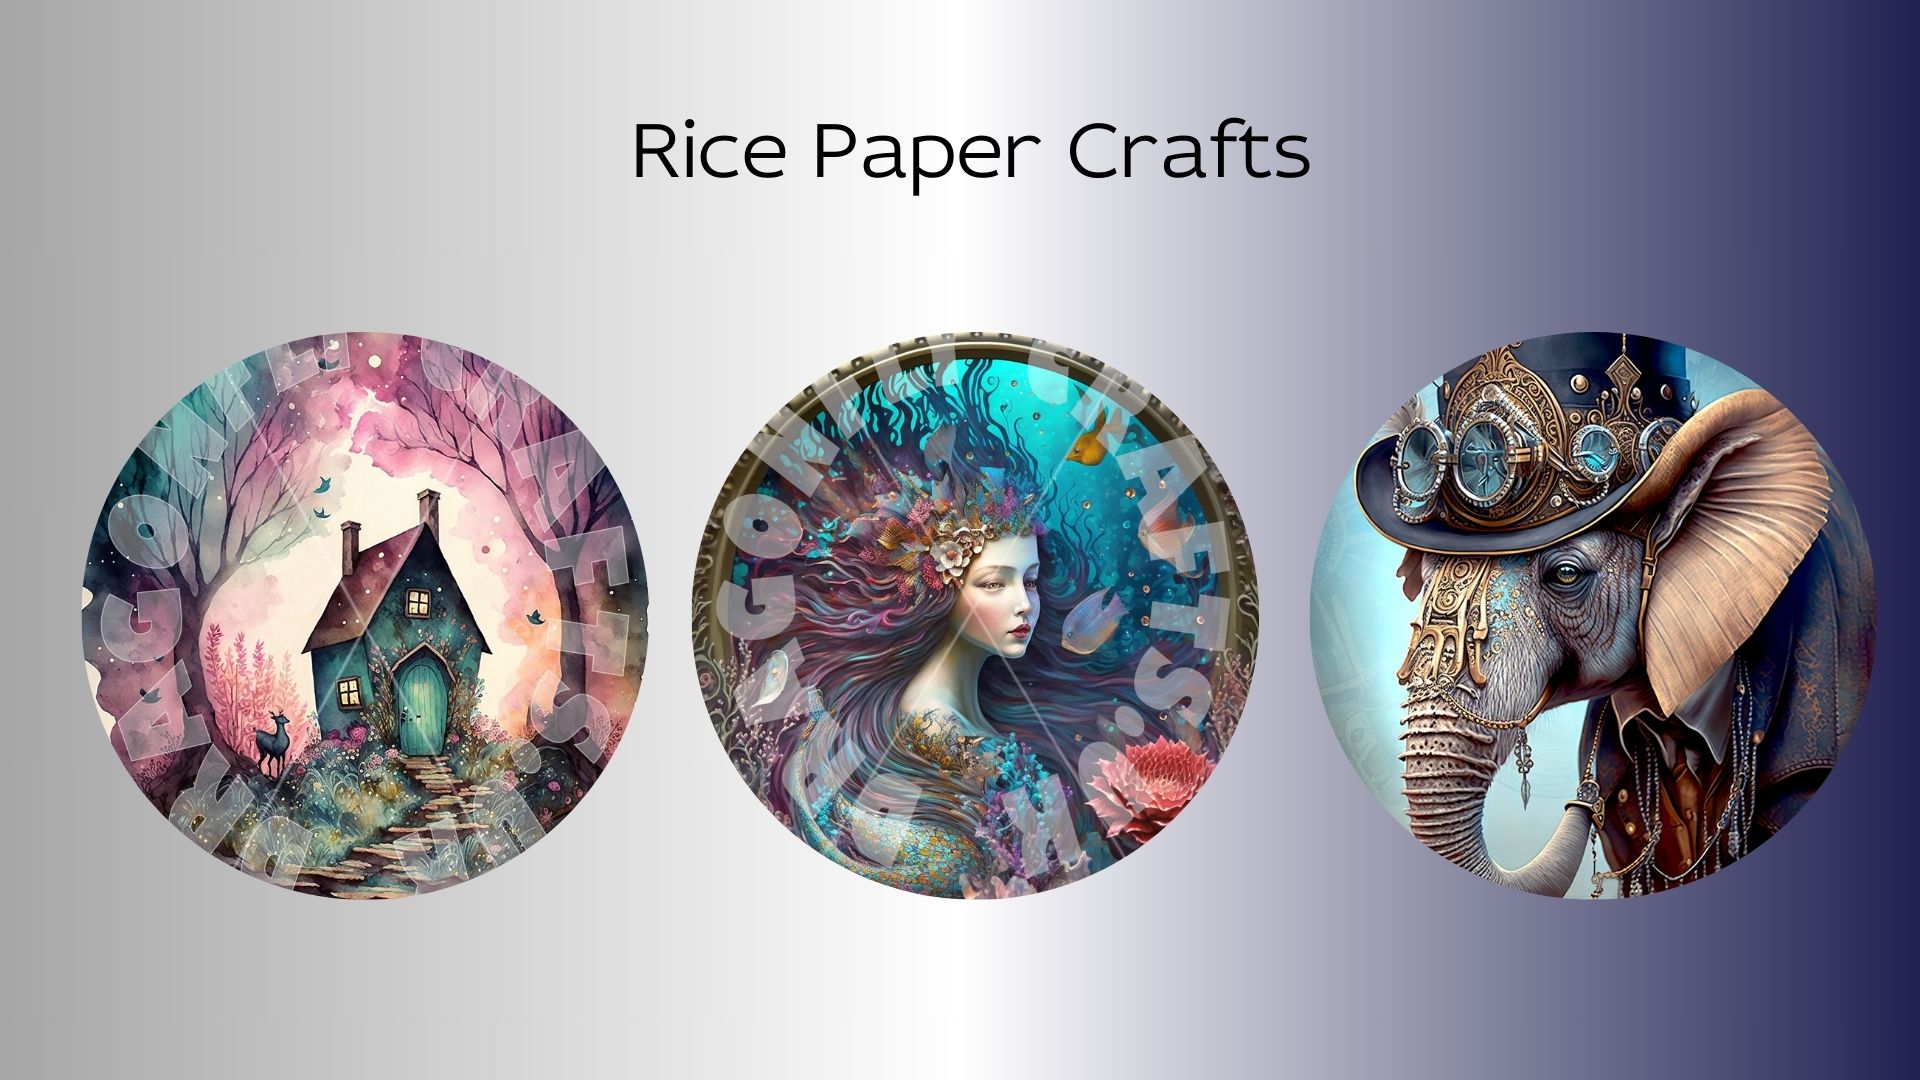 With a Wide Range of Paints and Rice Paper Crafts, You Can up Your Crafting Game